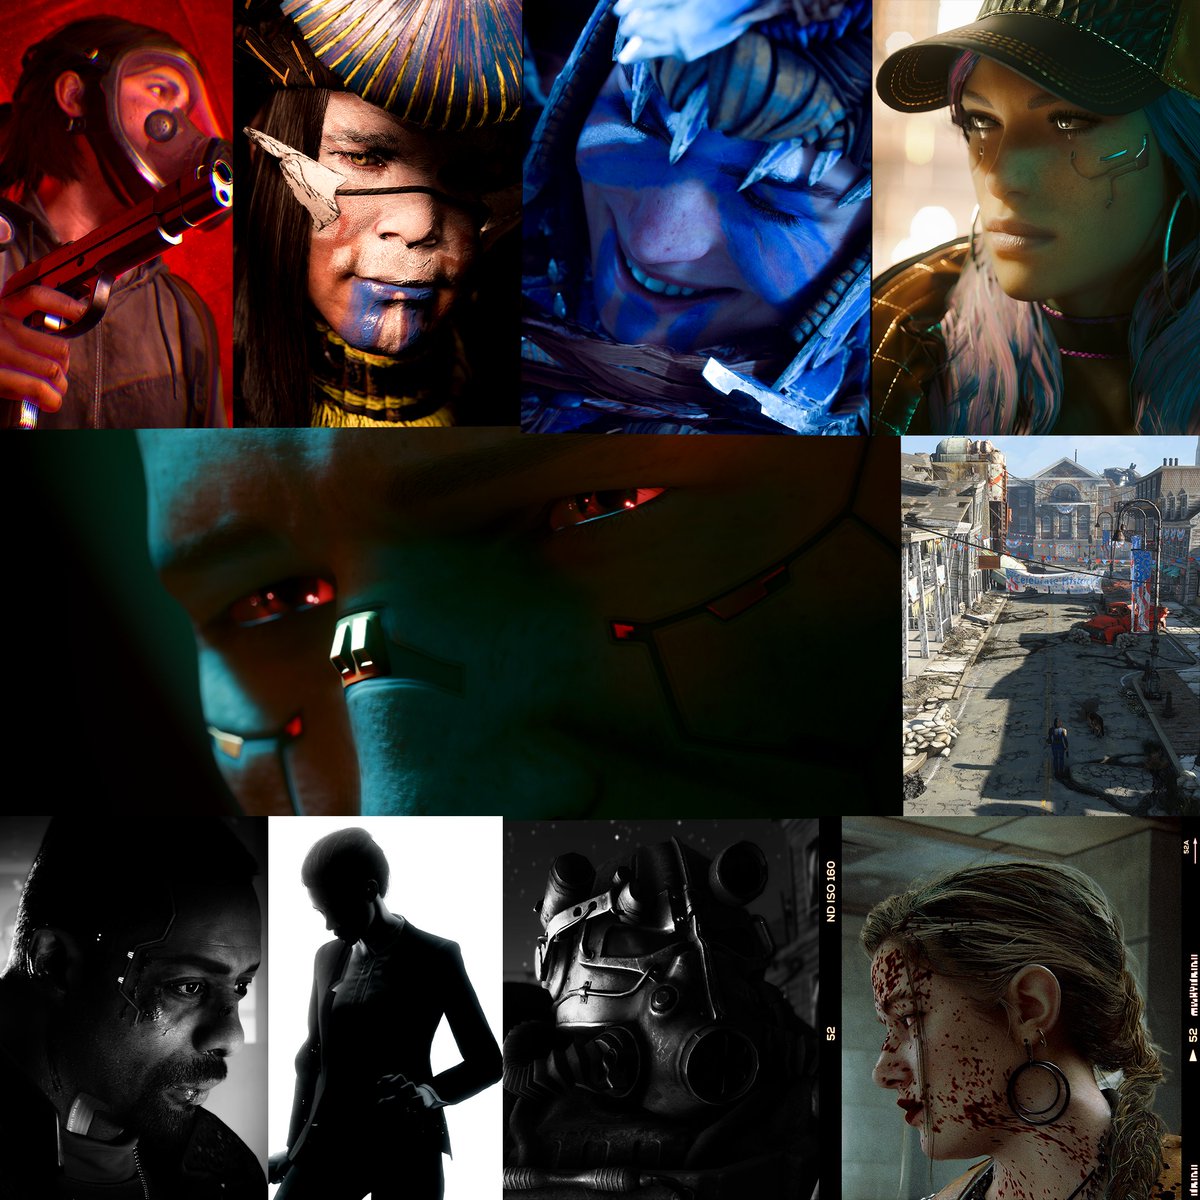 Favorite #VirtualPhotography shots from April. Some of my favorite posts of the year so far. looking forward to May, hoping to reach 700 followers in my Birthday month.

#TLOU2Remastered #HorizonForbiddenWest #Cyberpunk2077 #Fallout4 #Controlremedy